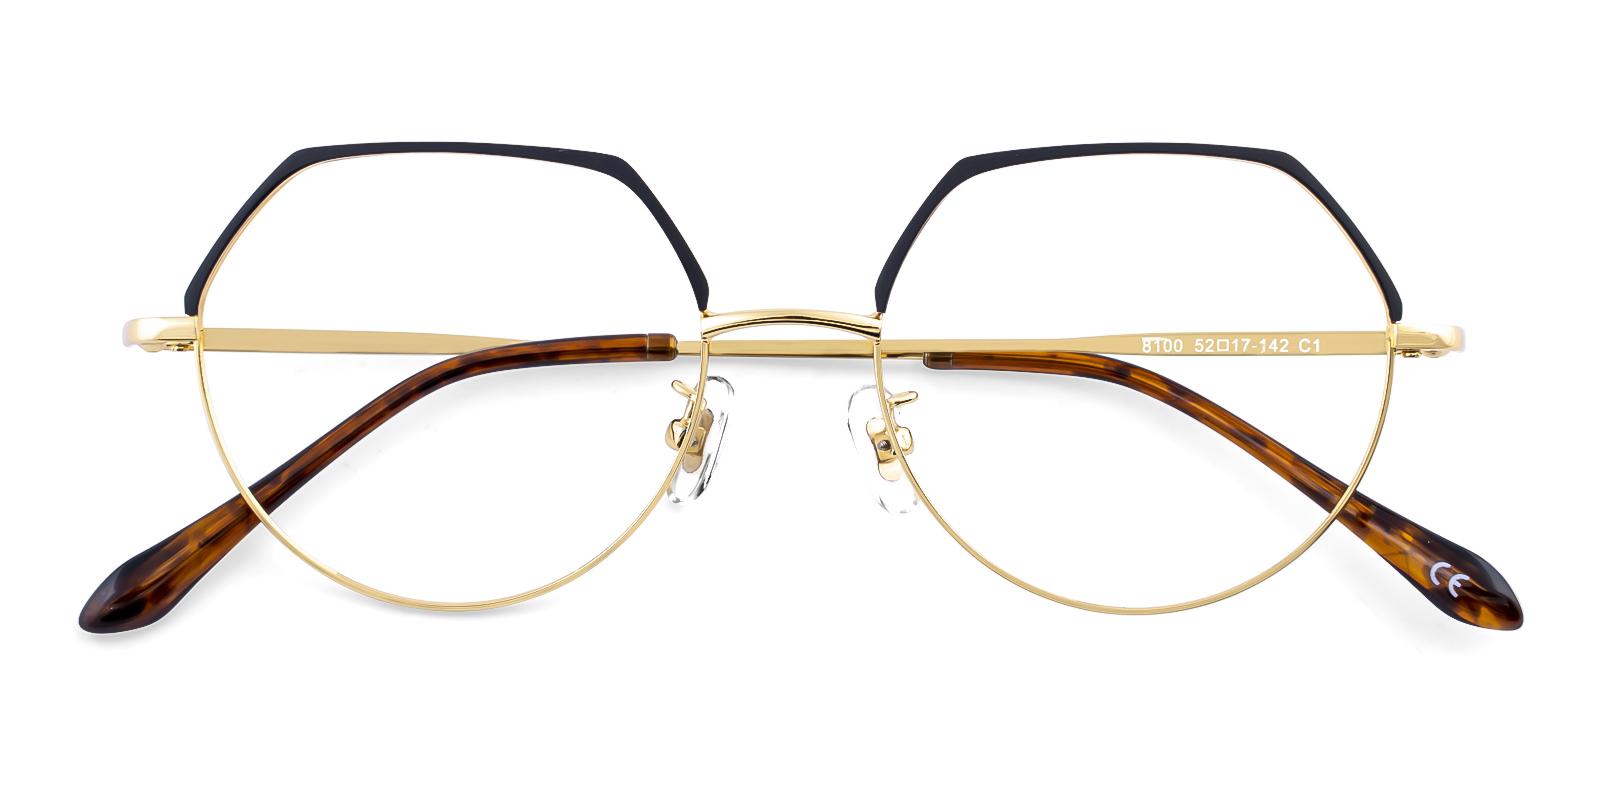 Actie Gold Metal Eyeglasses , NosePads Frames from ABBE Glasses